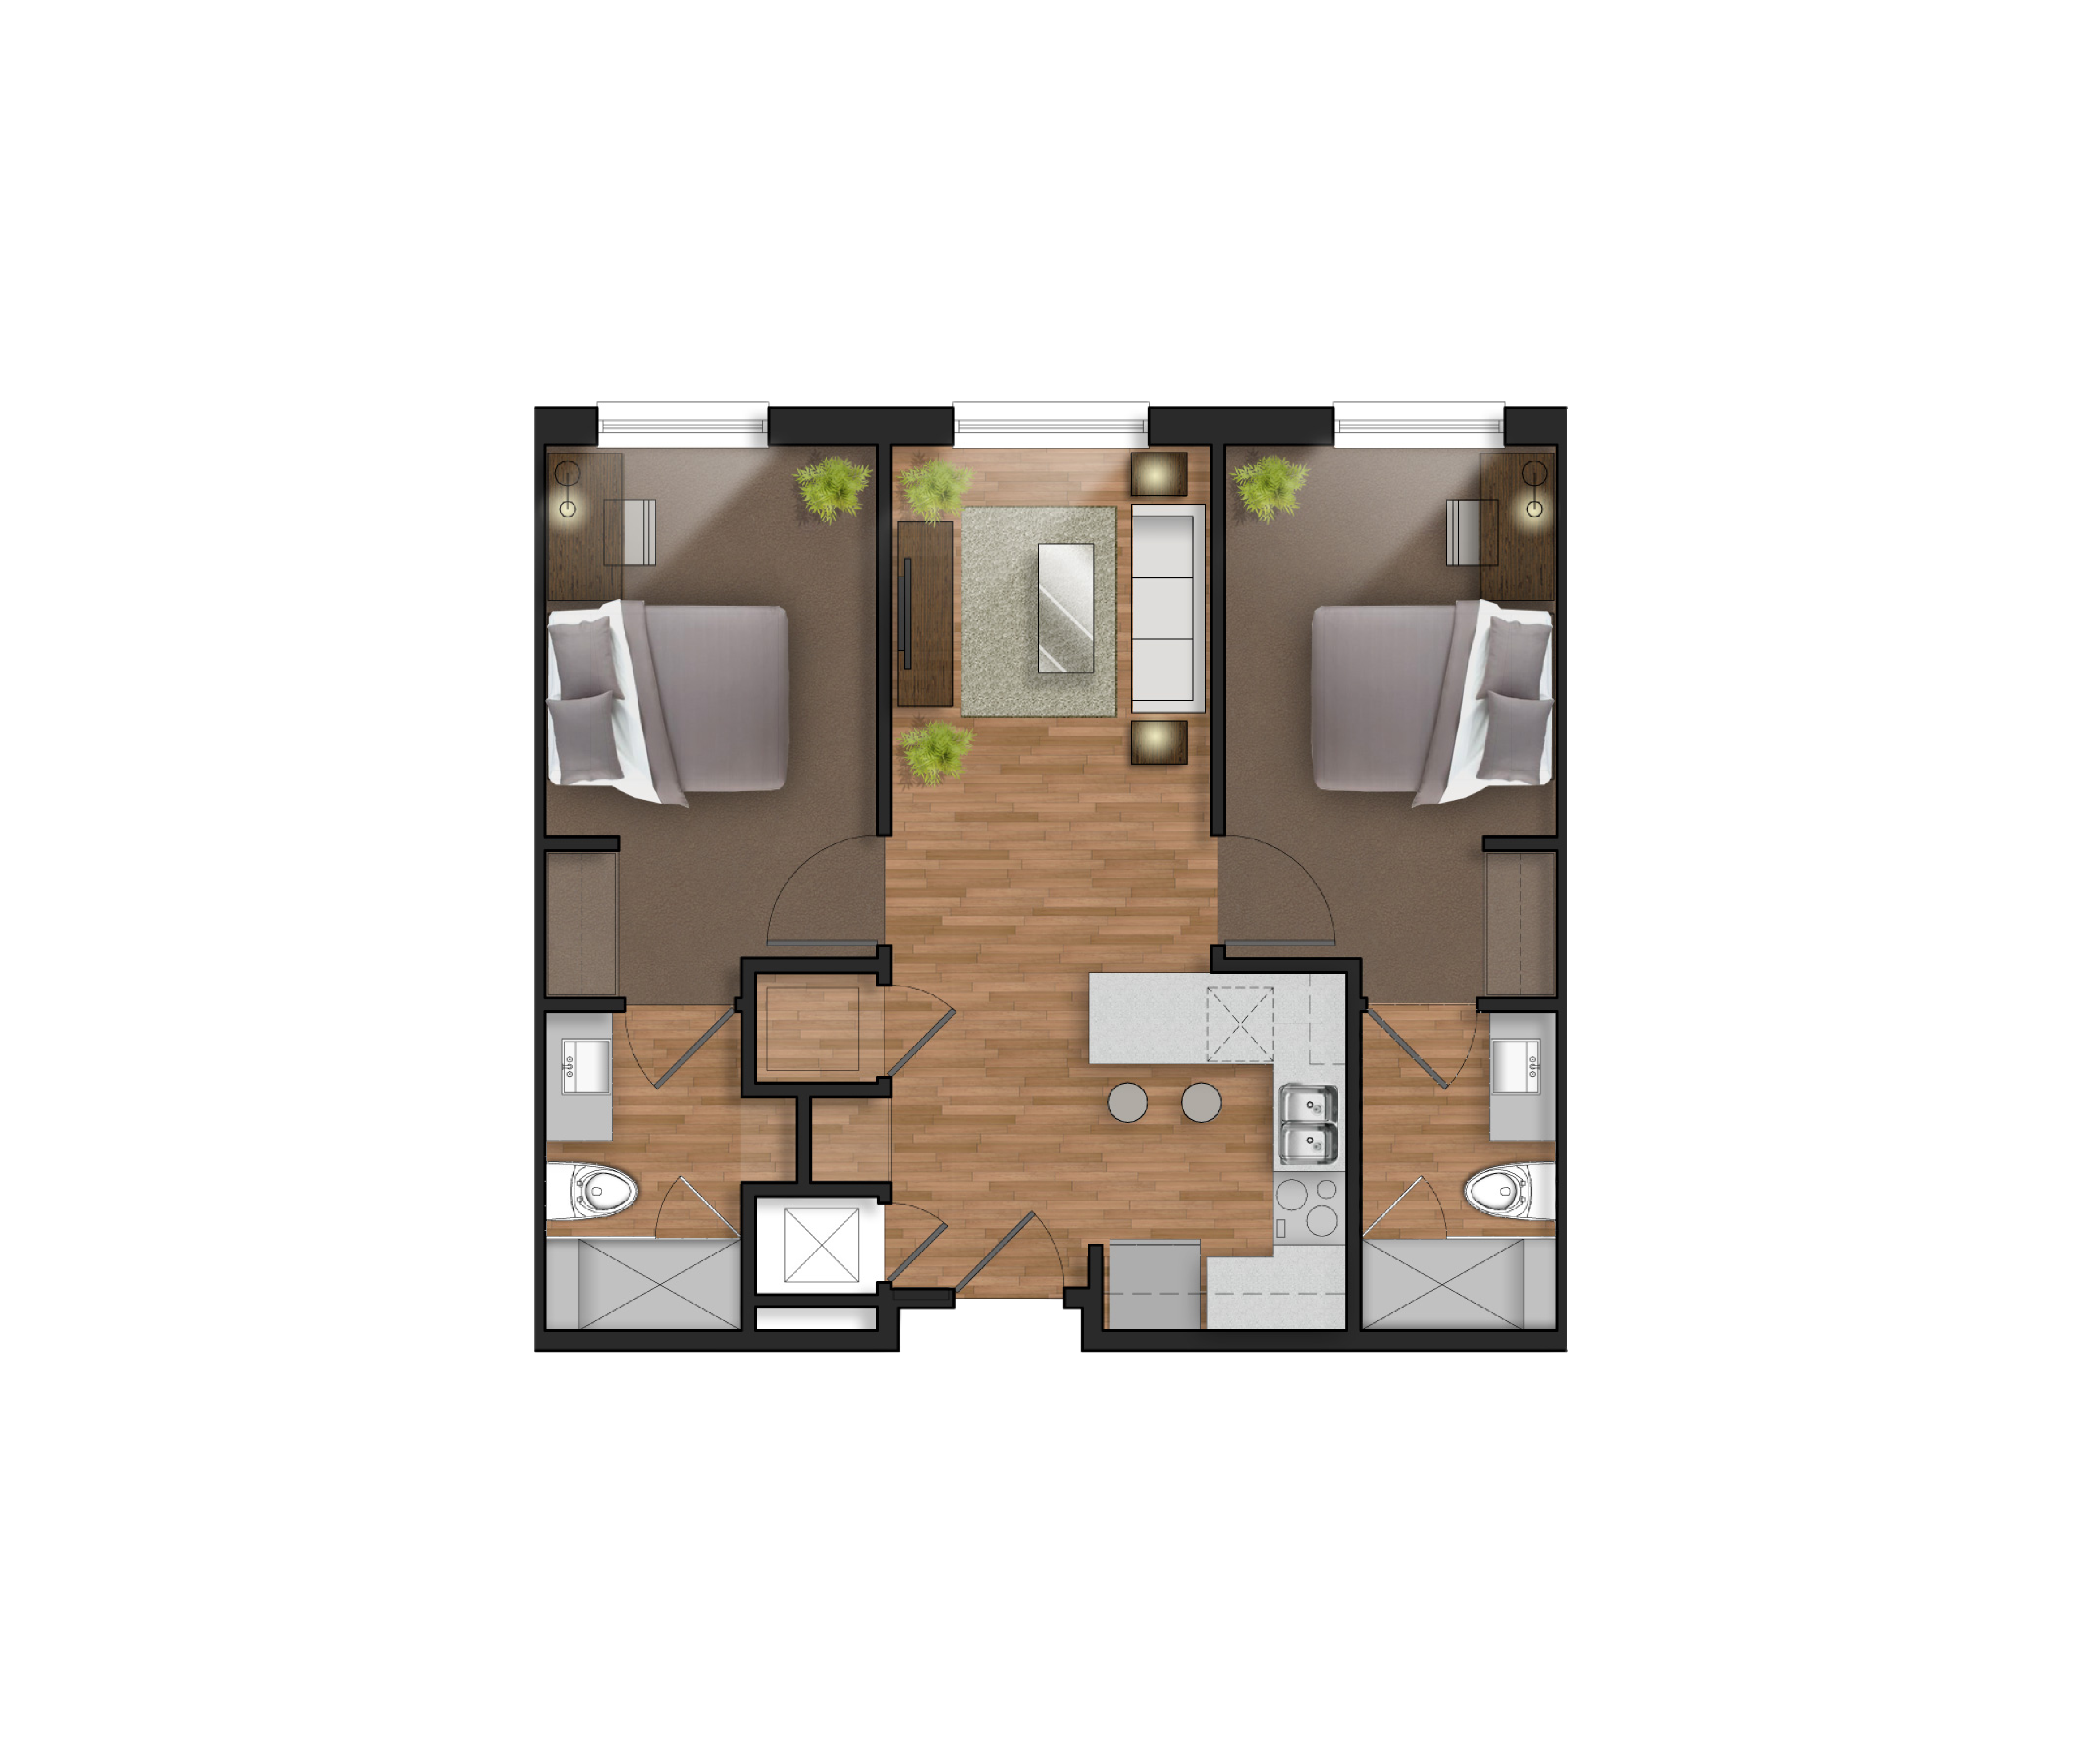 2 bedroom student apartment layout